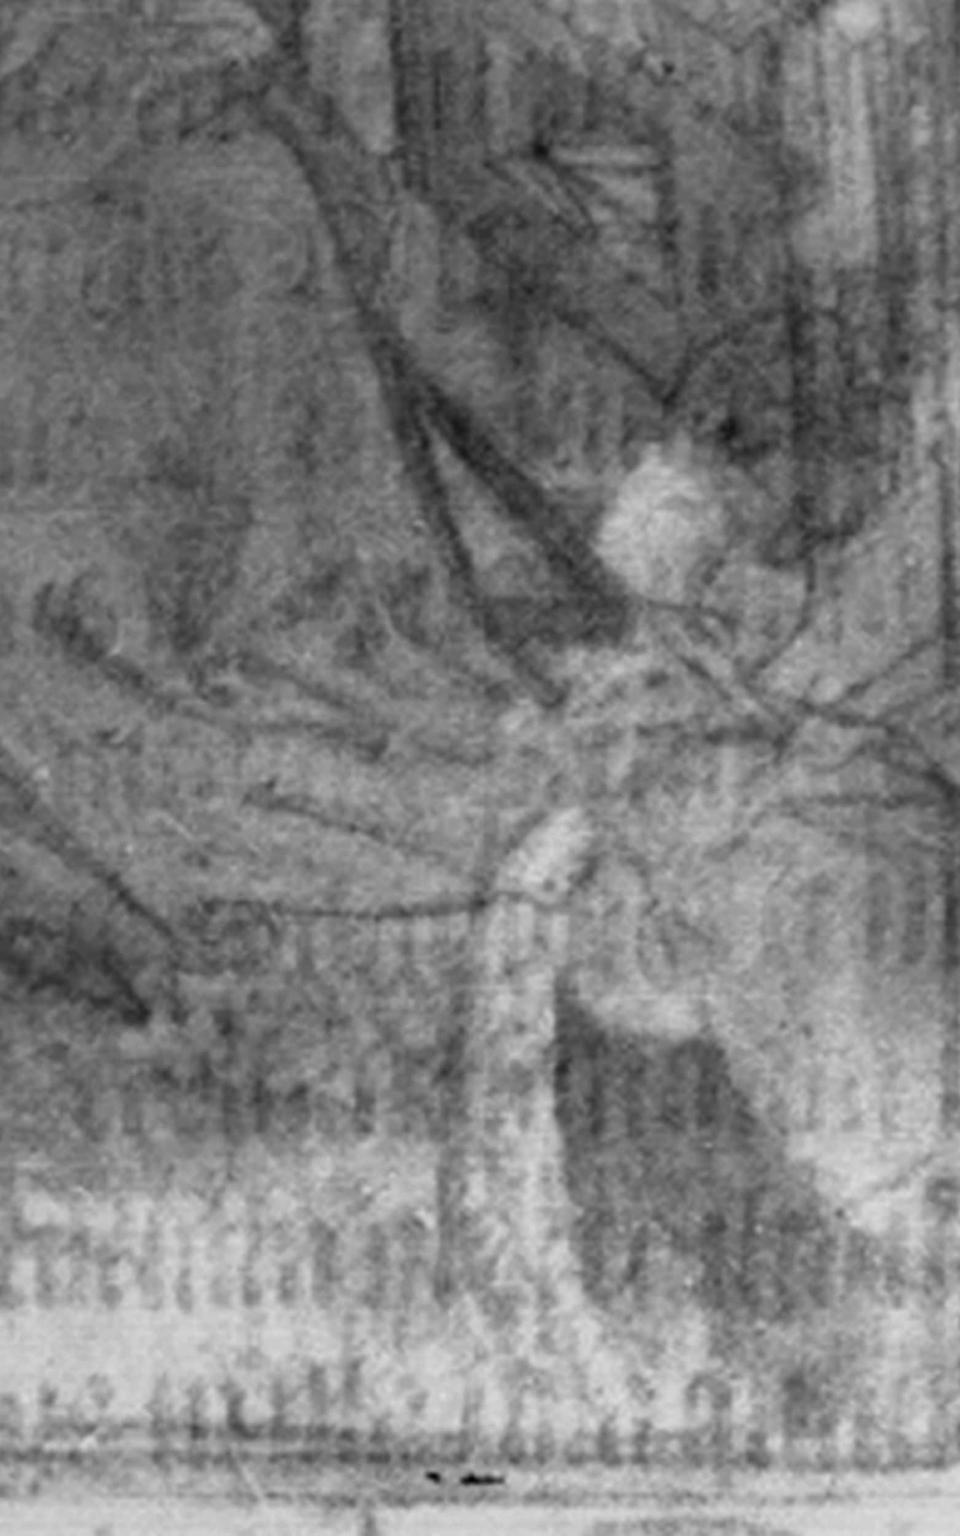 Infrared image showing the original underdrawing, with Virgin Mary's robe reaching as far as the margin, the kneeling figure of first wife Yolande with a large headdress – and without the figure of St Catherine - Fitzwilliam Museum/PA